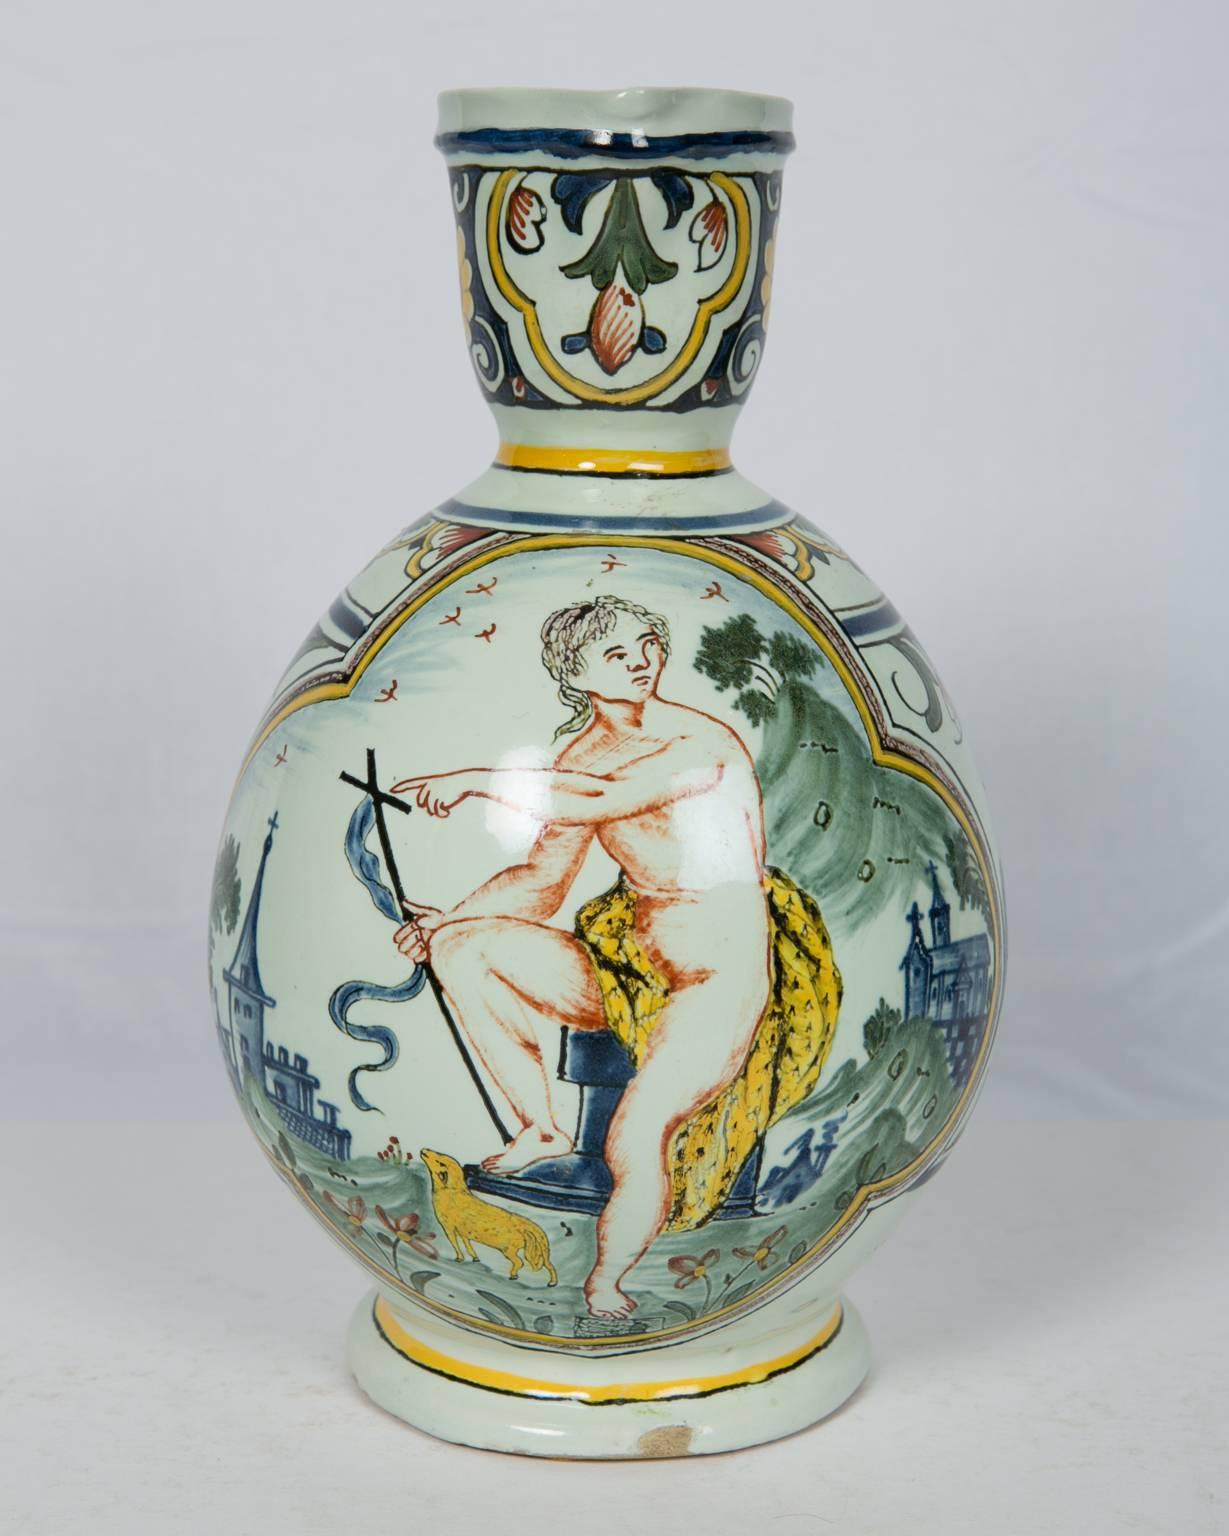 We are pleased to offer this French faience polychrome pitcher. In the center rests St. John the Baptist. On the other side of the pitcher is inscribed: 